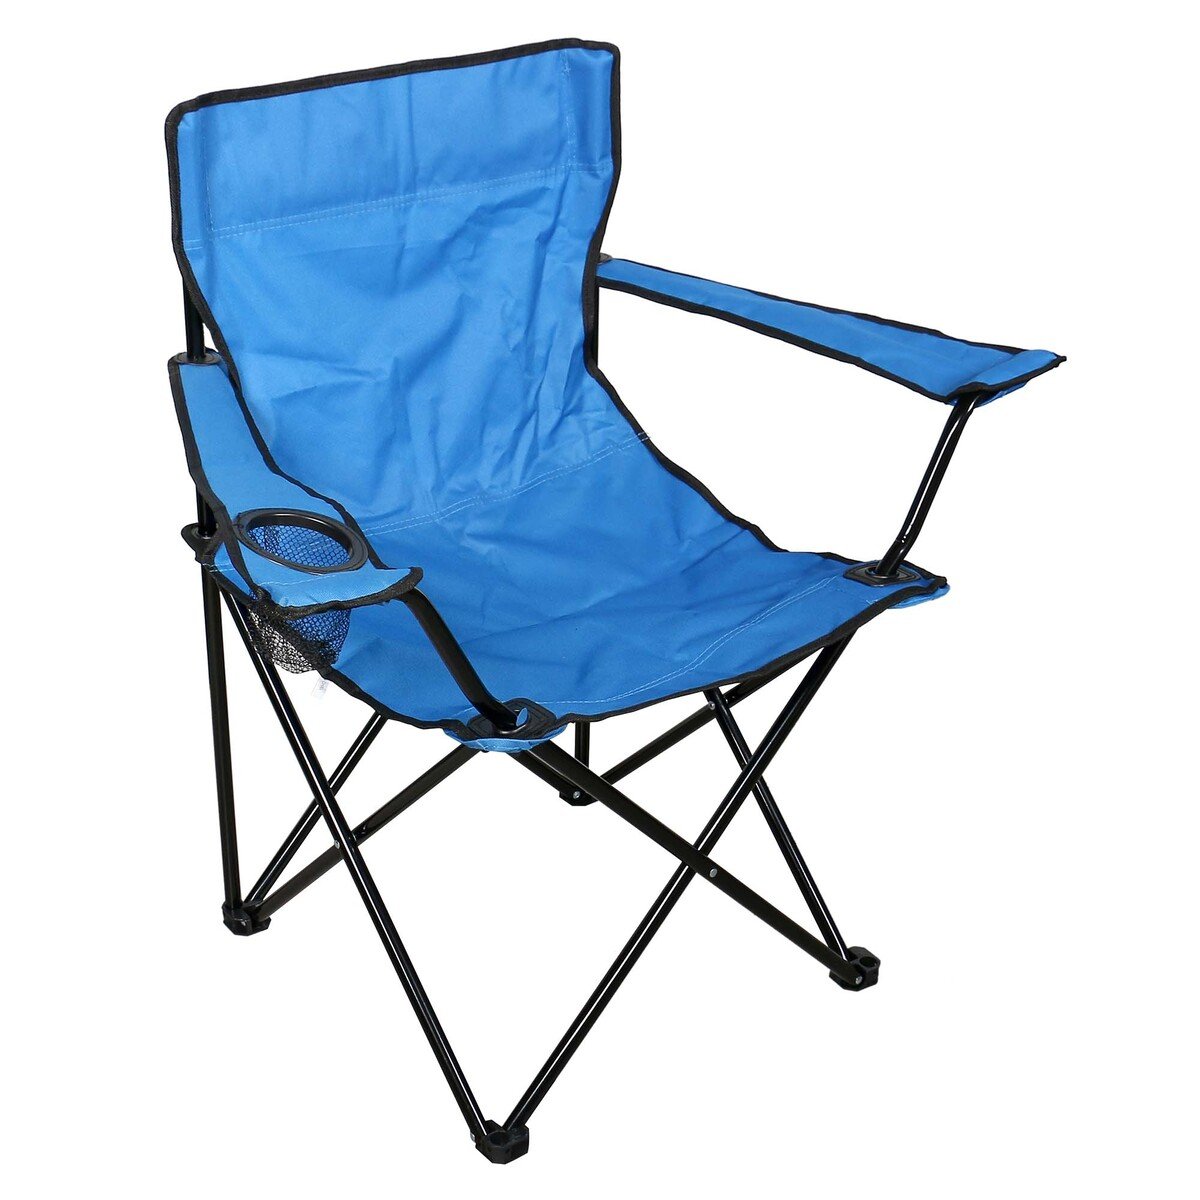 Campmate Folding Camping Chair, 20062